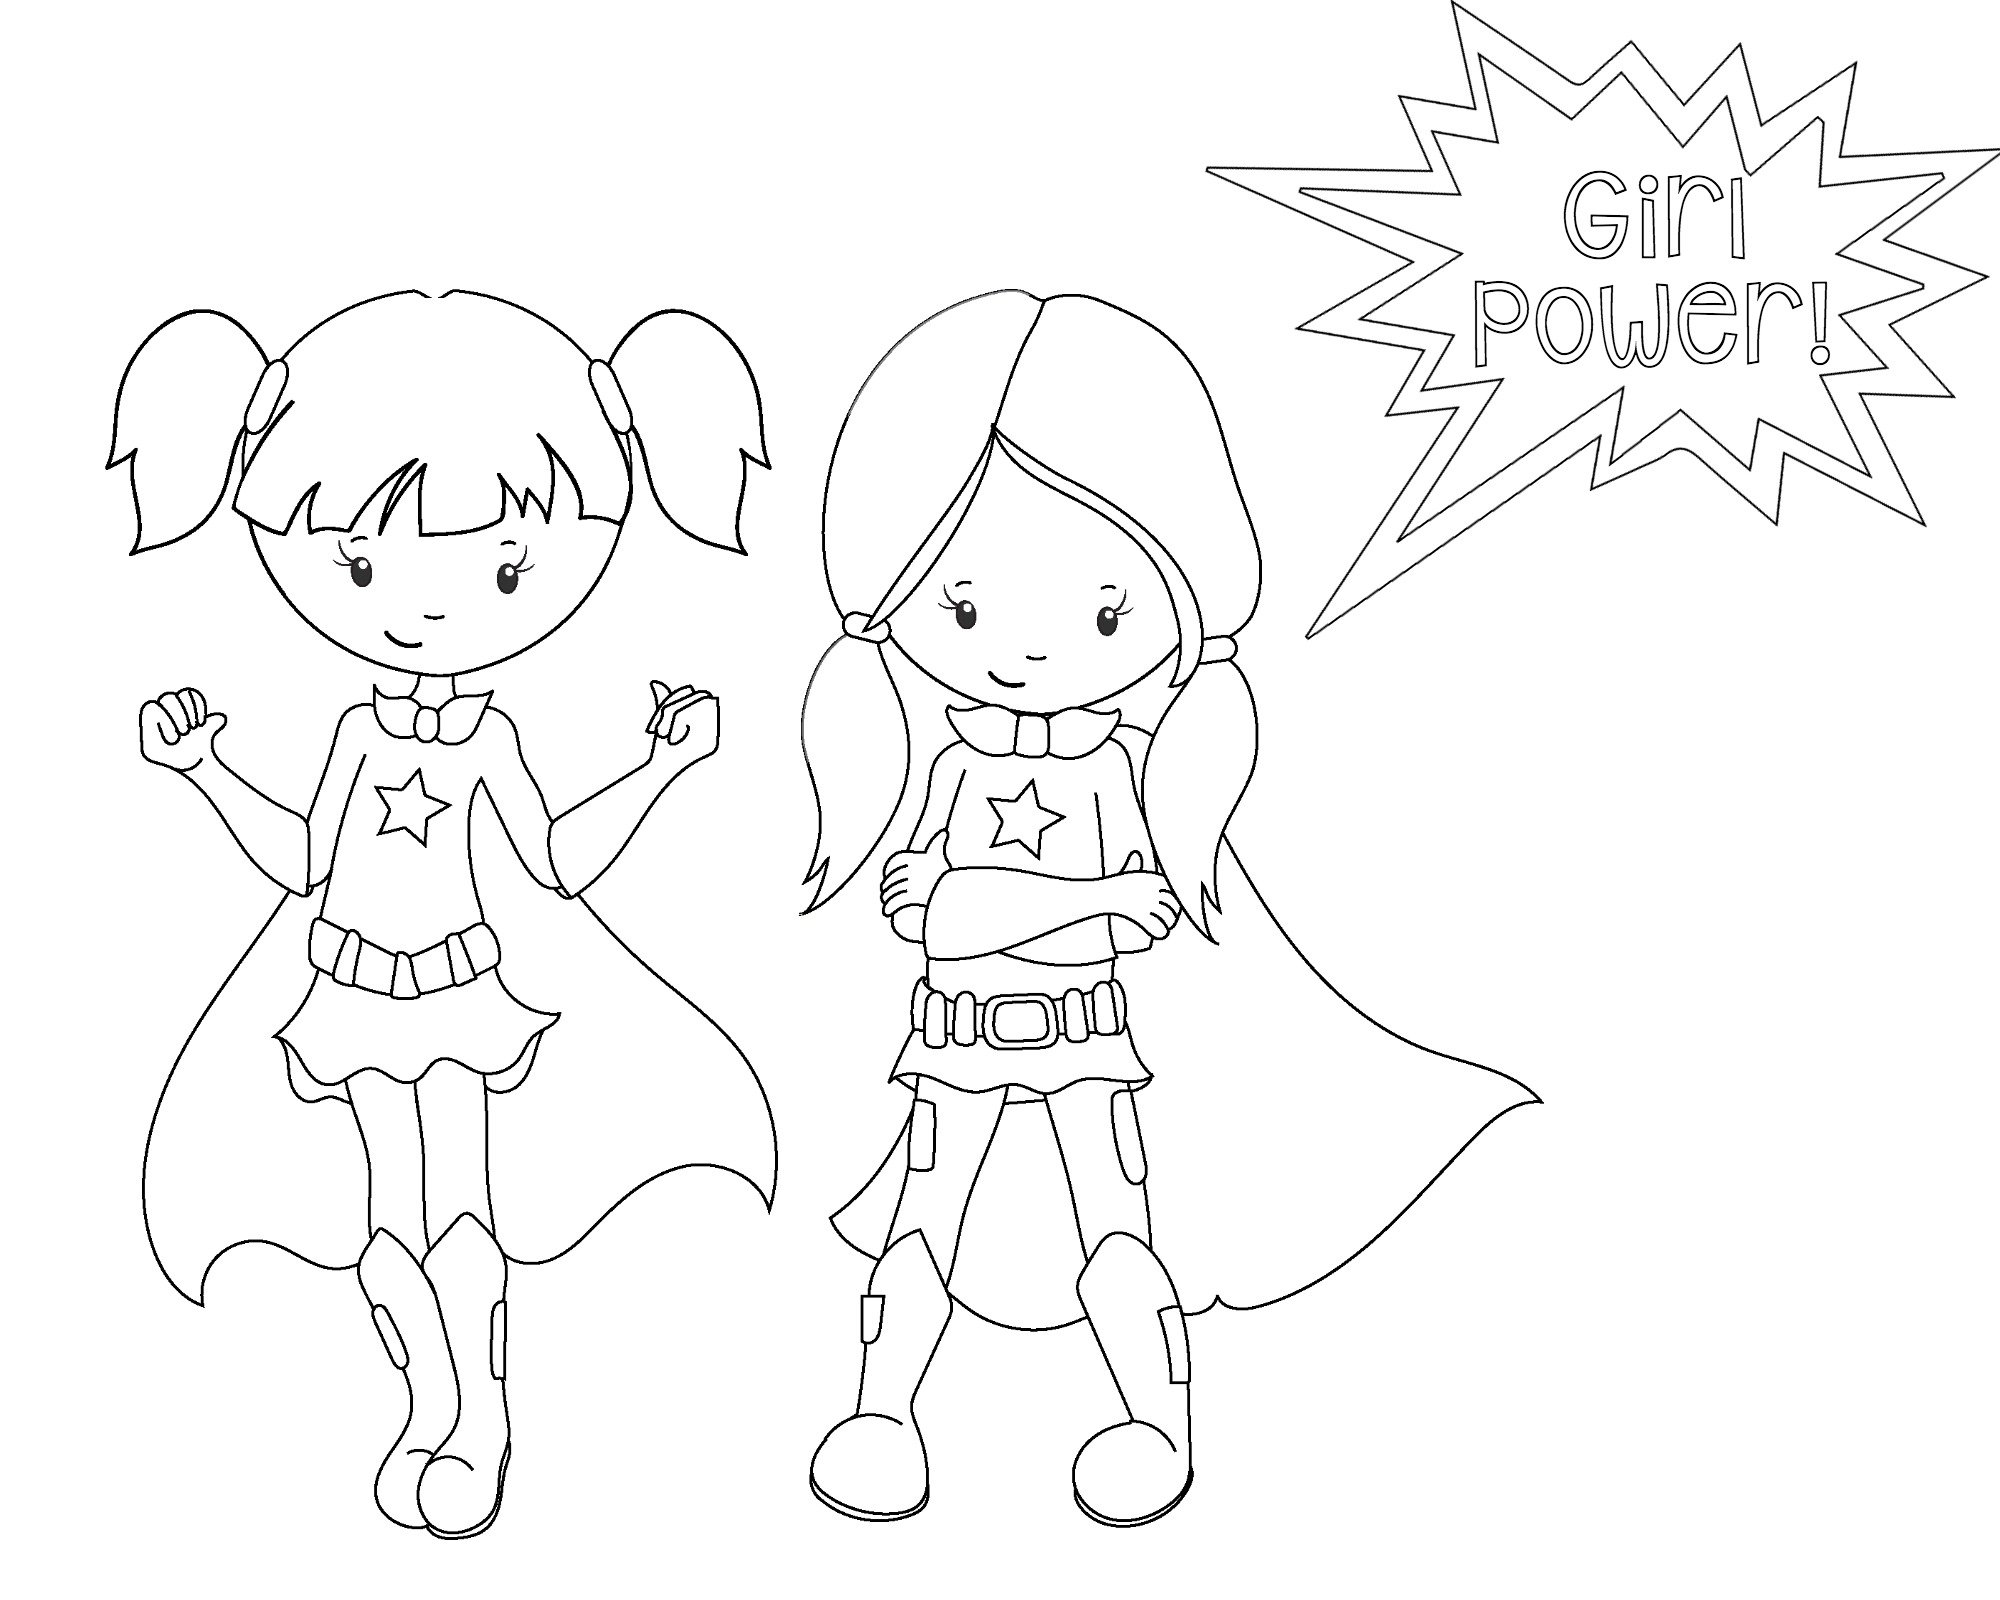 Free Printable Superhero Coloring Sheets for Kids - Crazy Little Projects